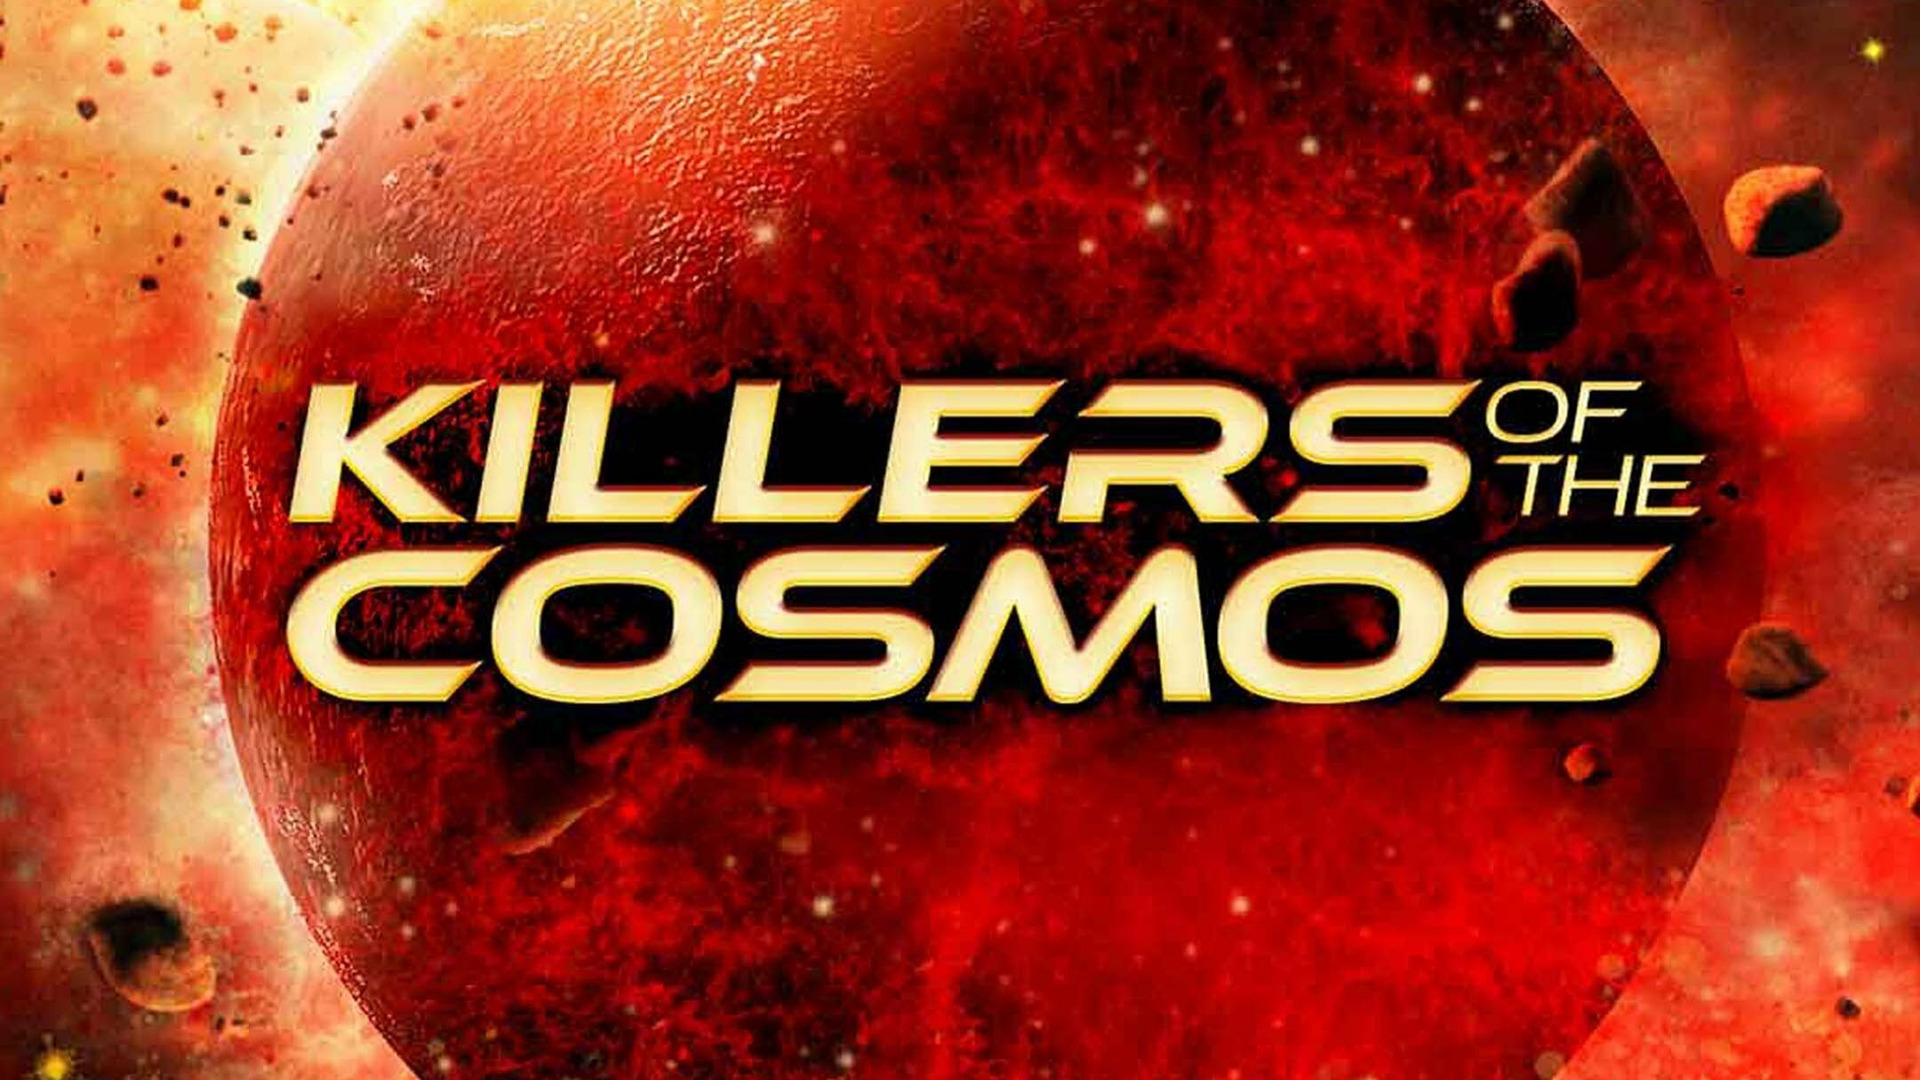 Show Killers of the Cosmos